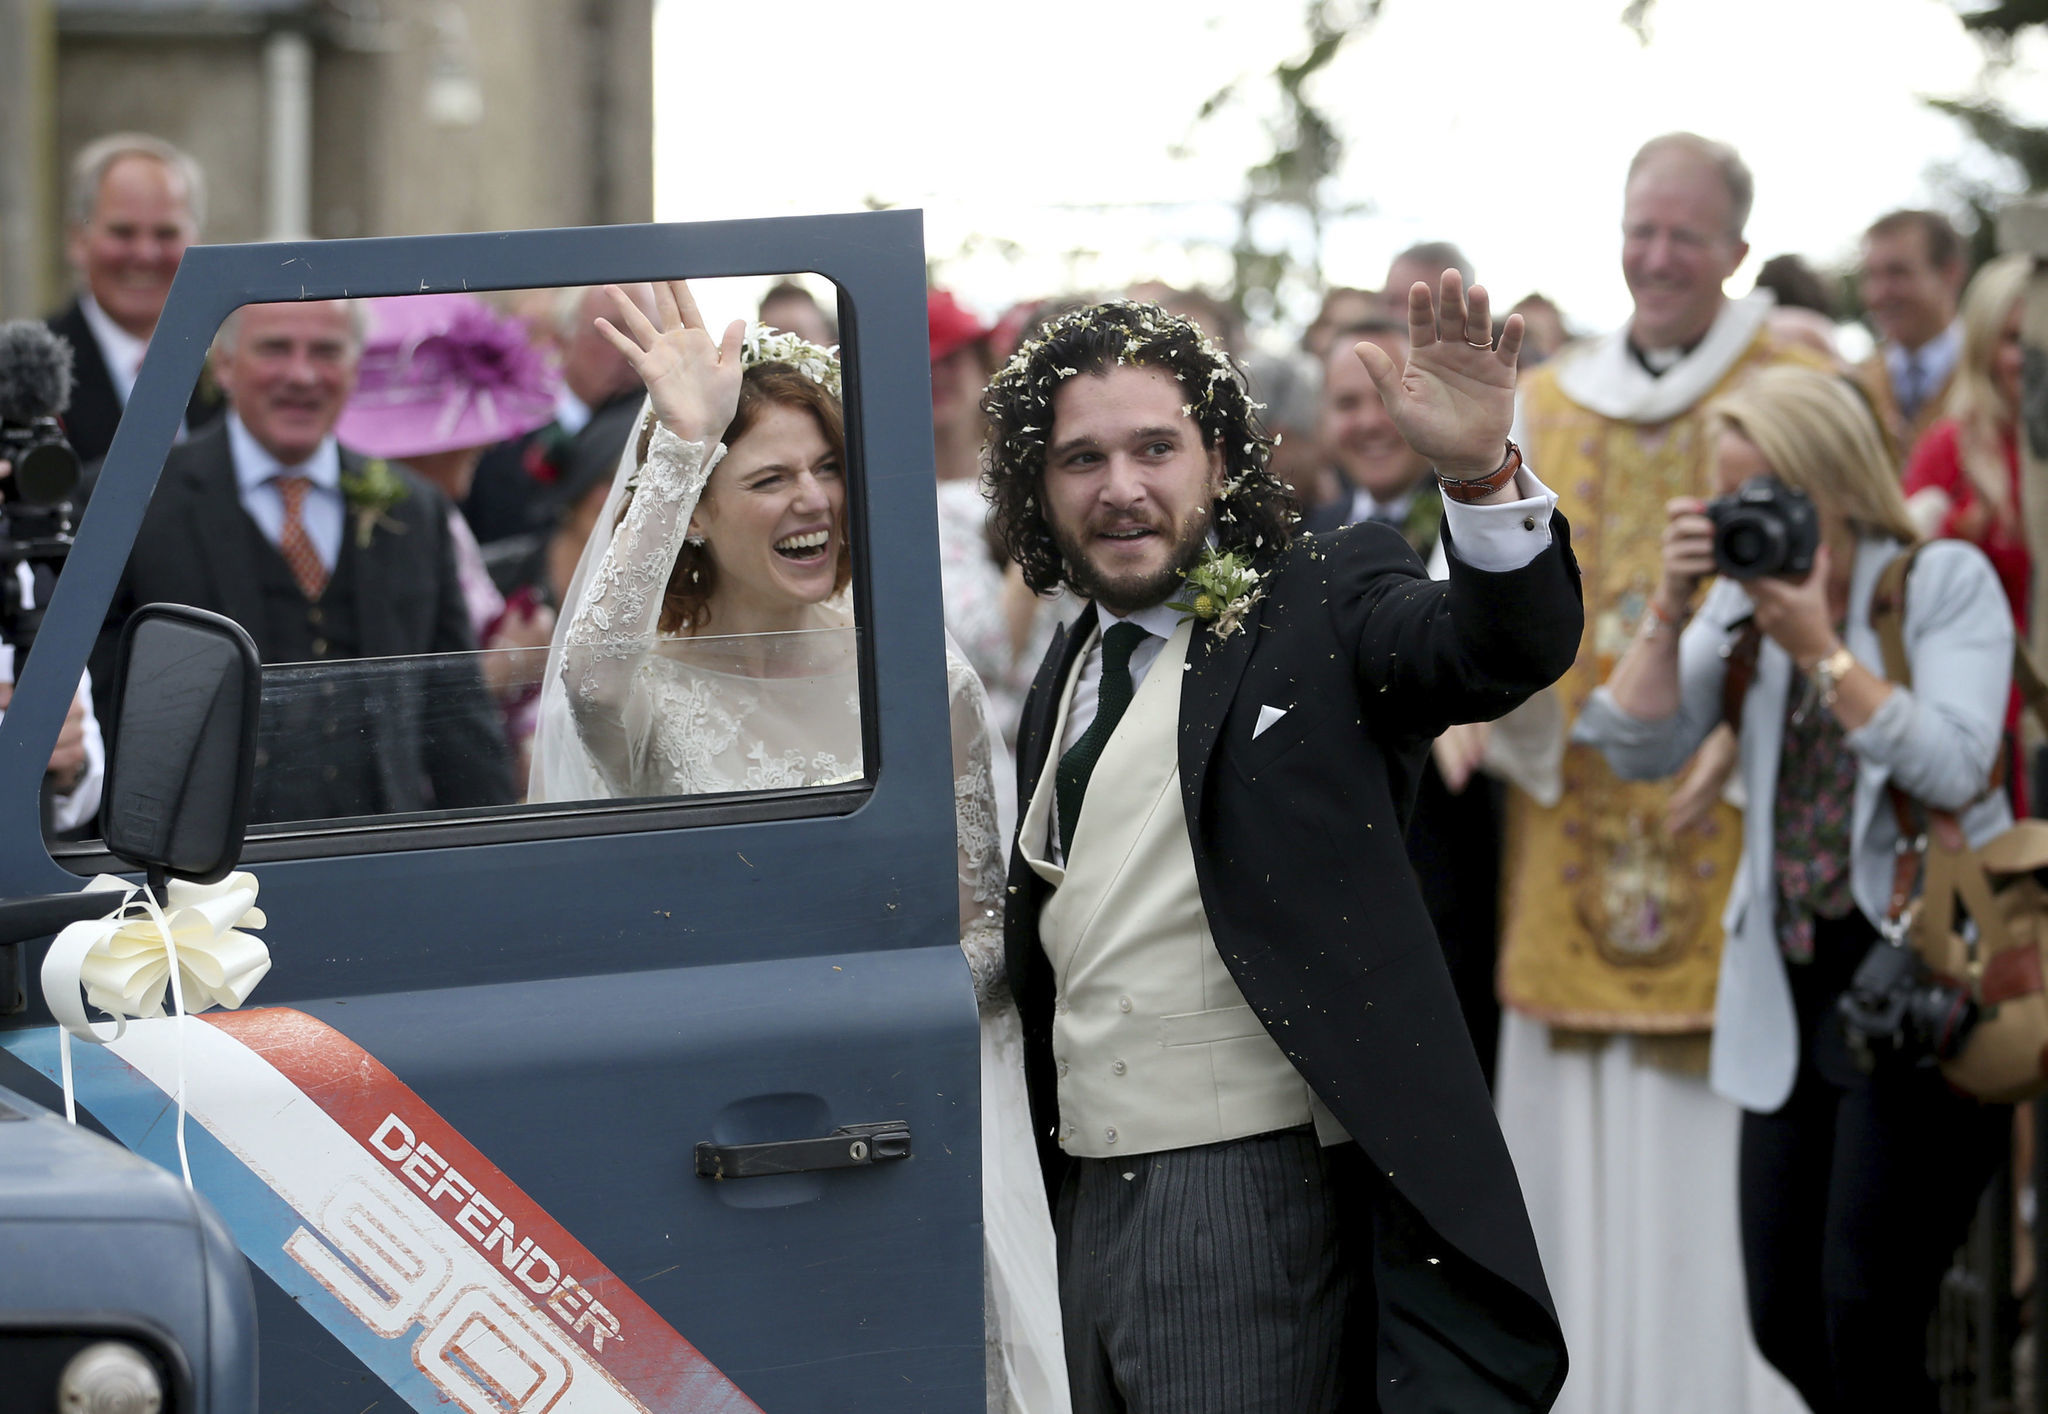 For once, a happy 'Game of Thrones' wedding: co-stars Kit Harington and Rose Leslie ...2048 x 1414